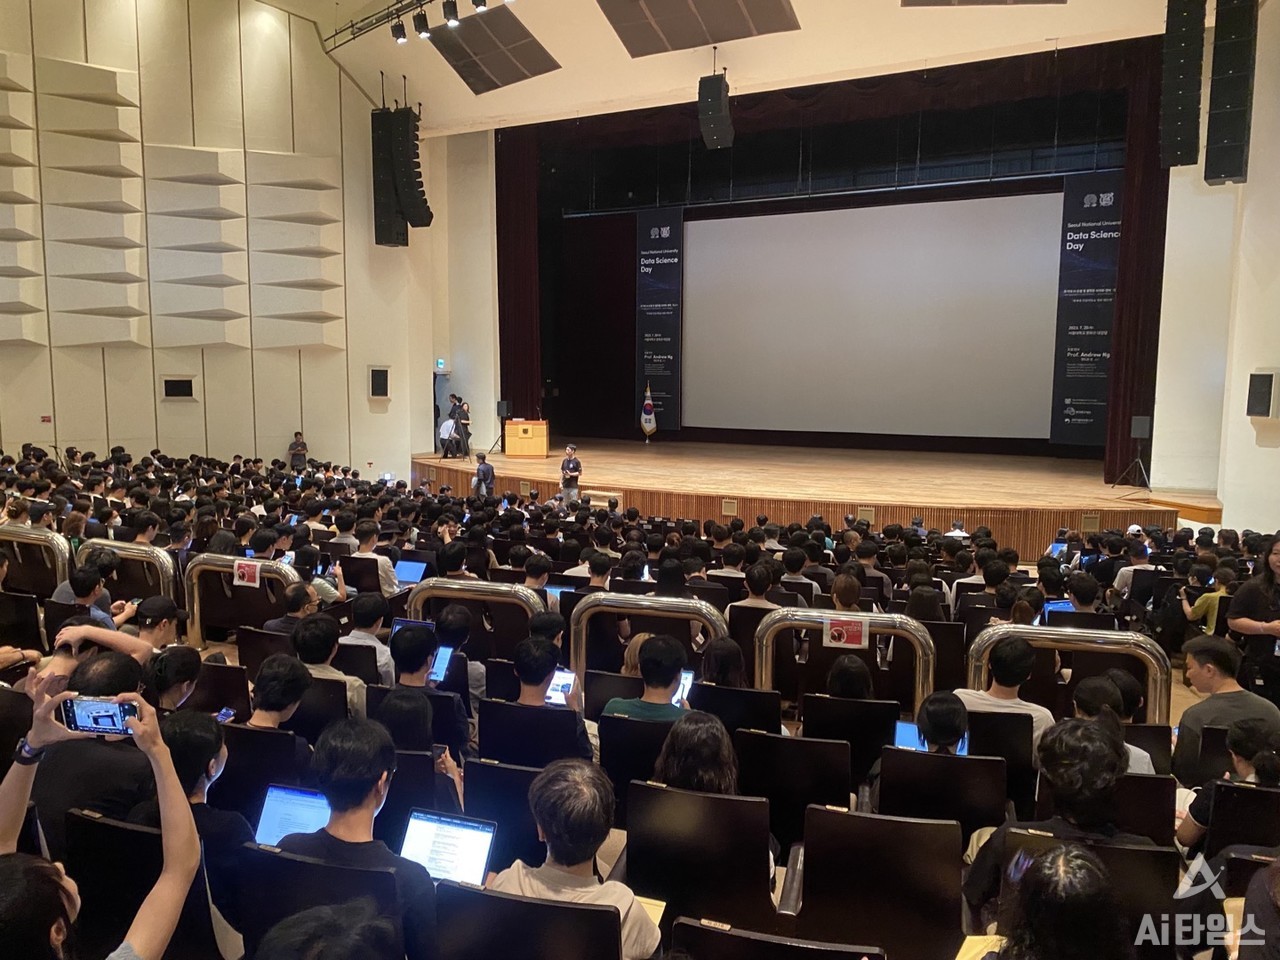 View of Seoul National University Cultural Center Auditorium, where the opening ceremony of the Super-Gigantic AI Model and Platform Optimization Center (CHAMP) was held 